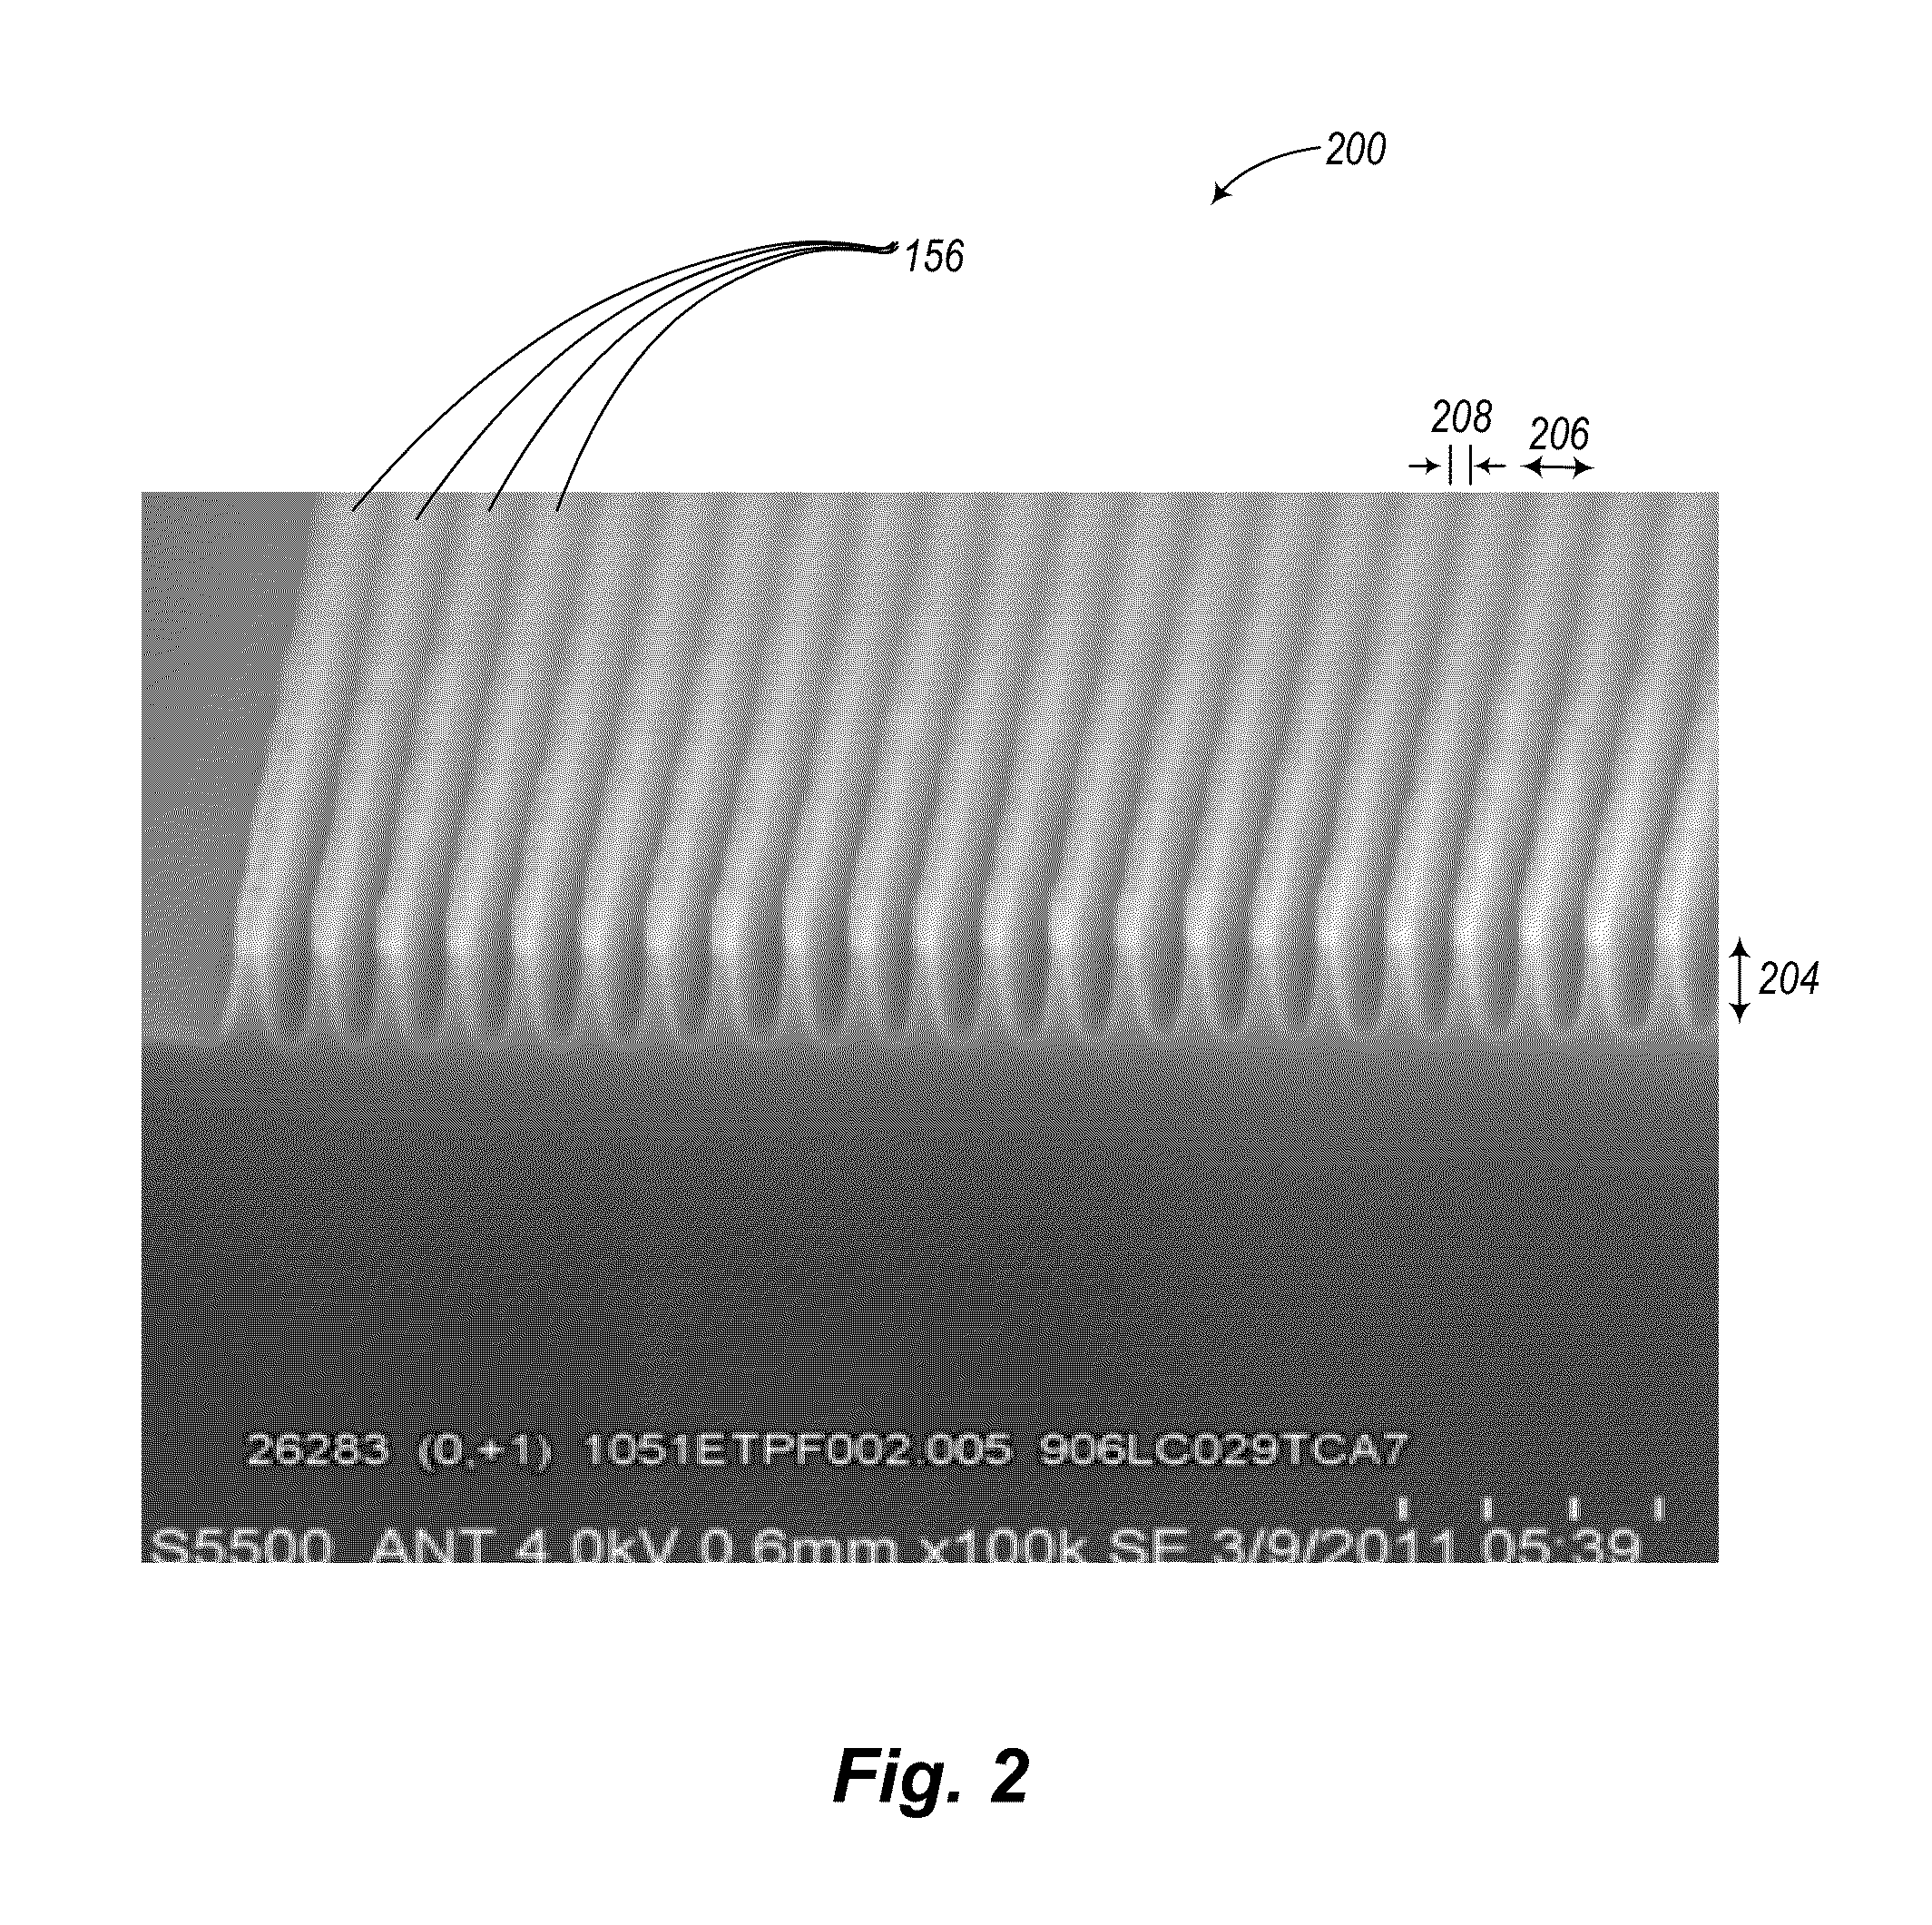 Fully substrate-isolated finfet transistor